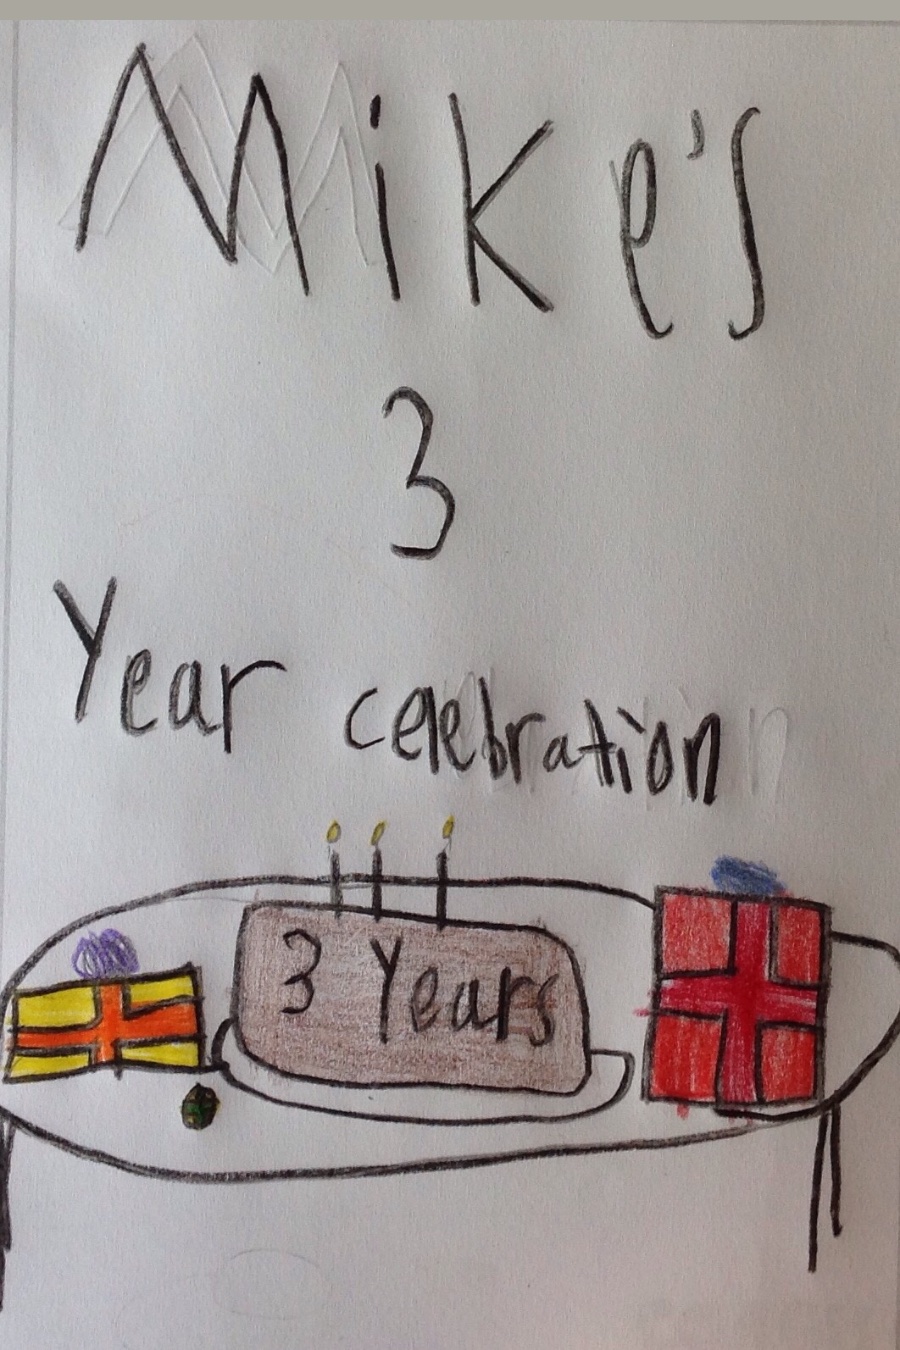 Mike’s 3 Year Celebration by Lauryn S